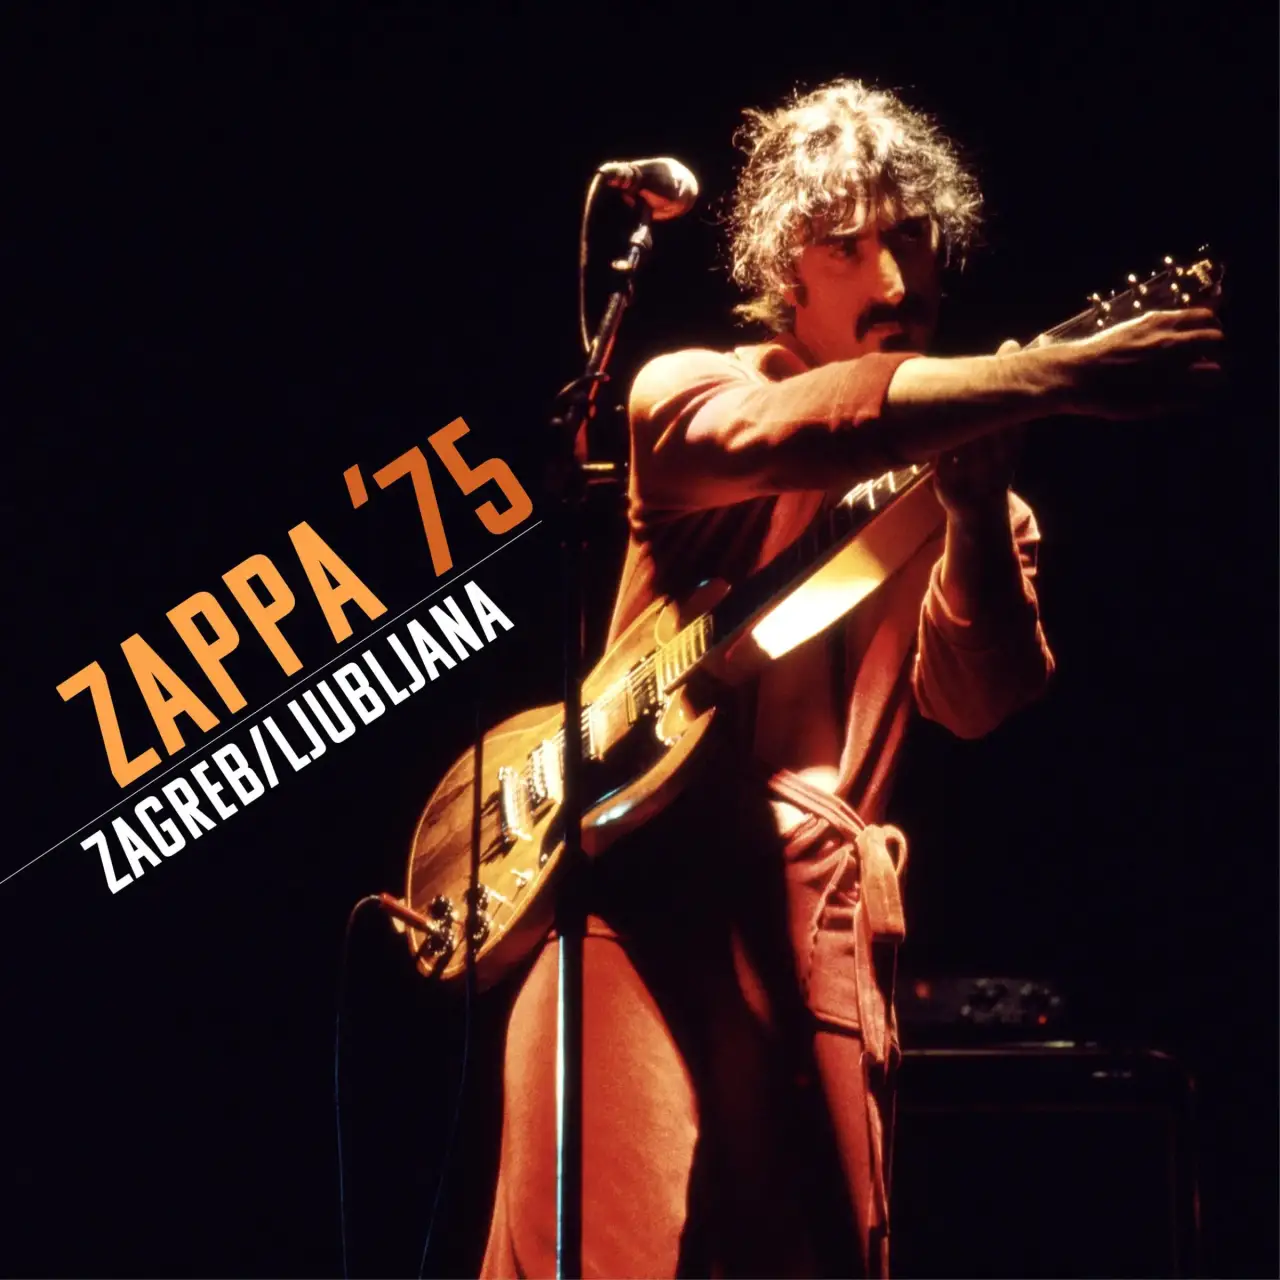 Zappa 75 captures Frank Zappa and rare, short-lived lineup of the Mothers performing in Yugolsavia img#1